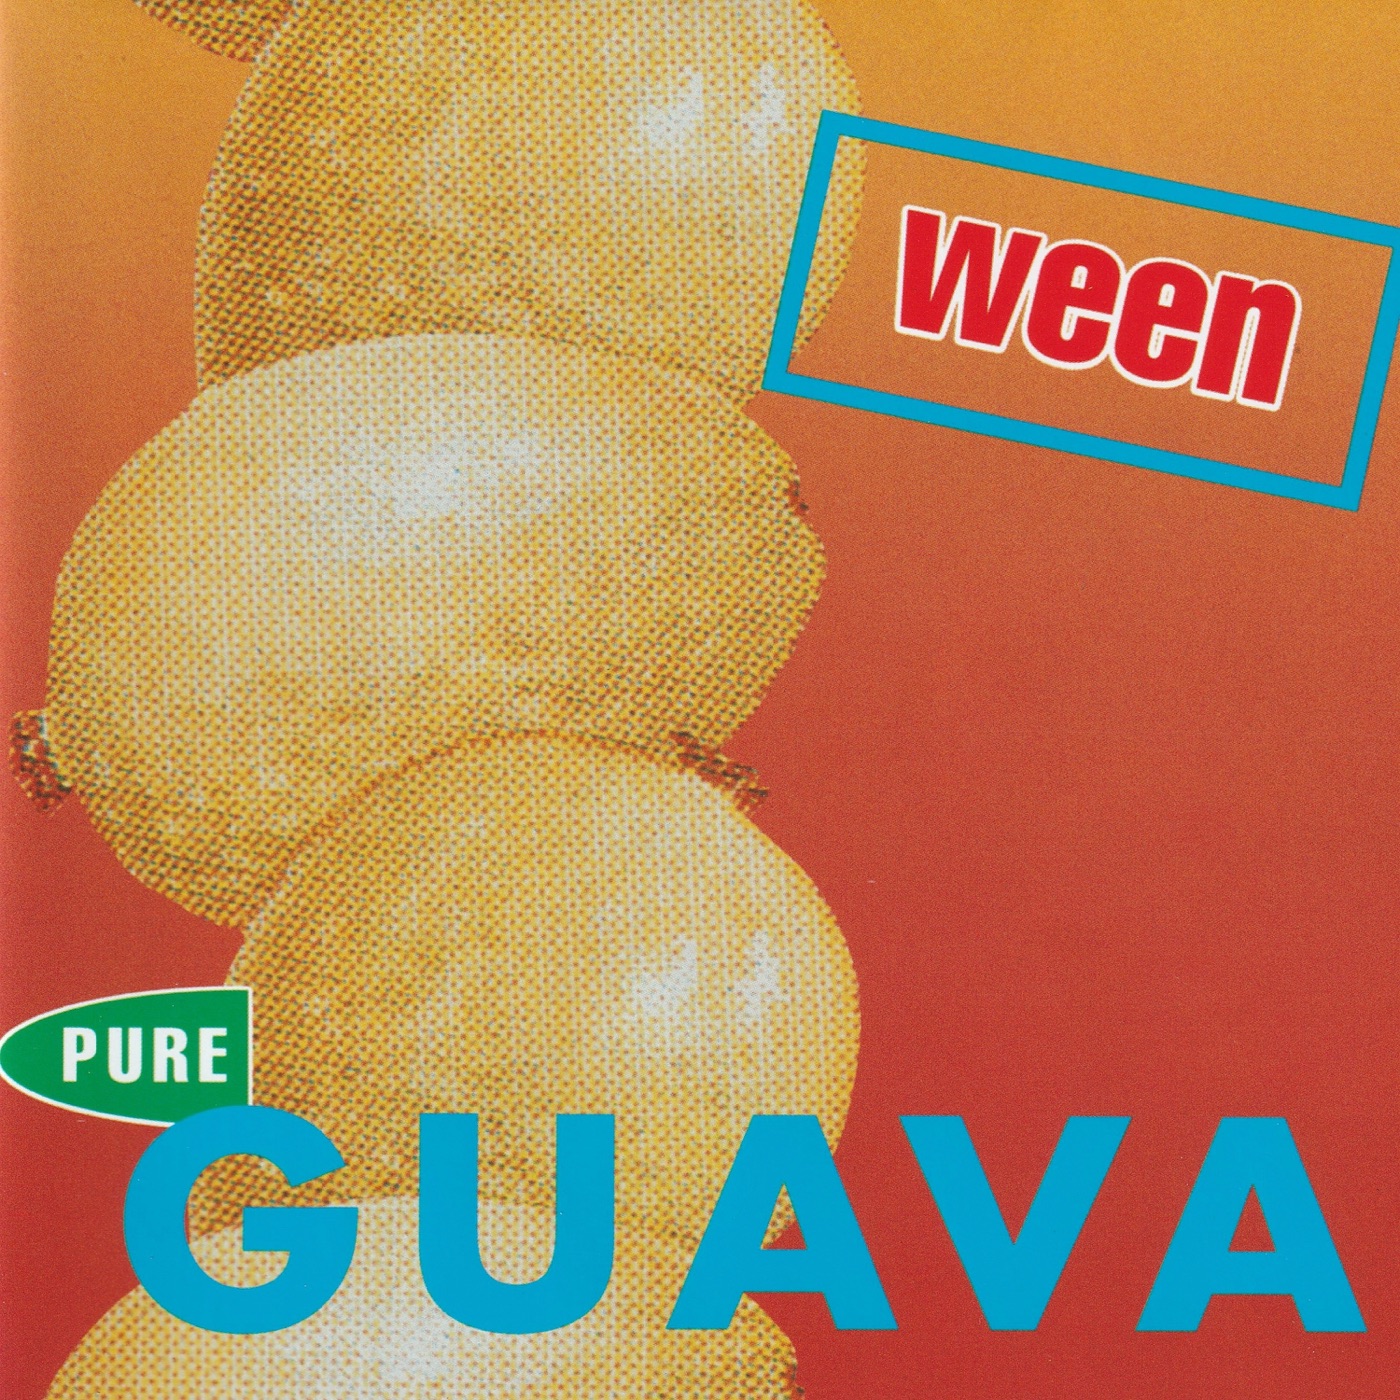 Pure Guava by Ween